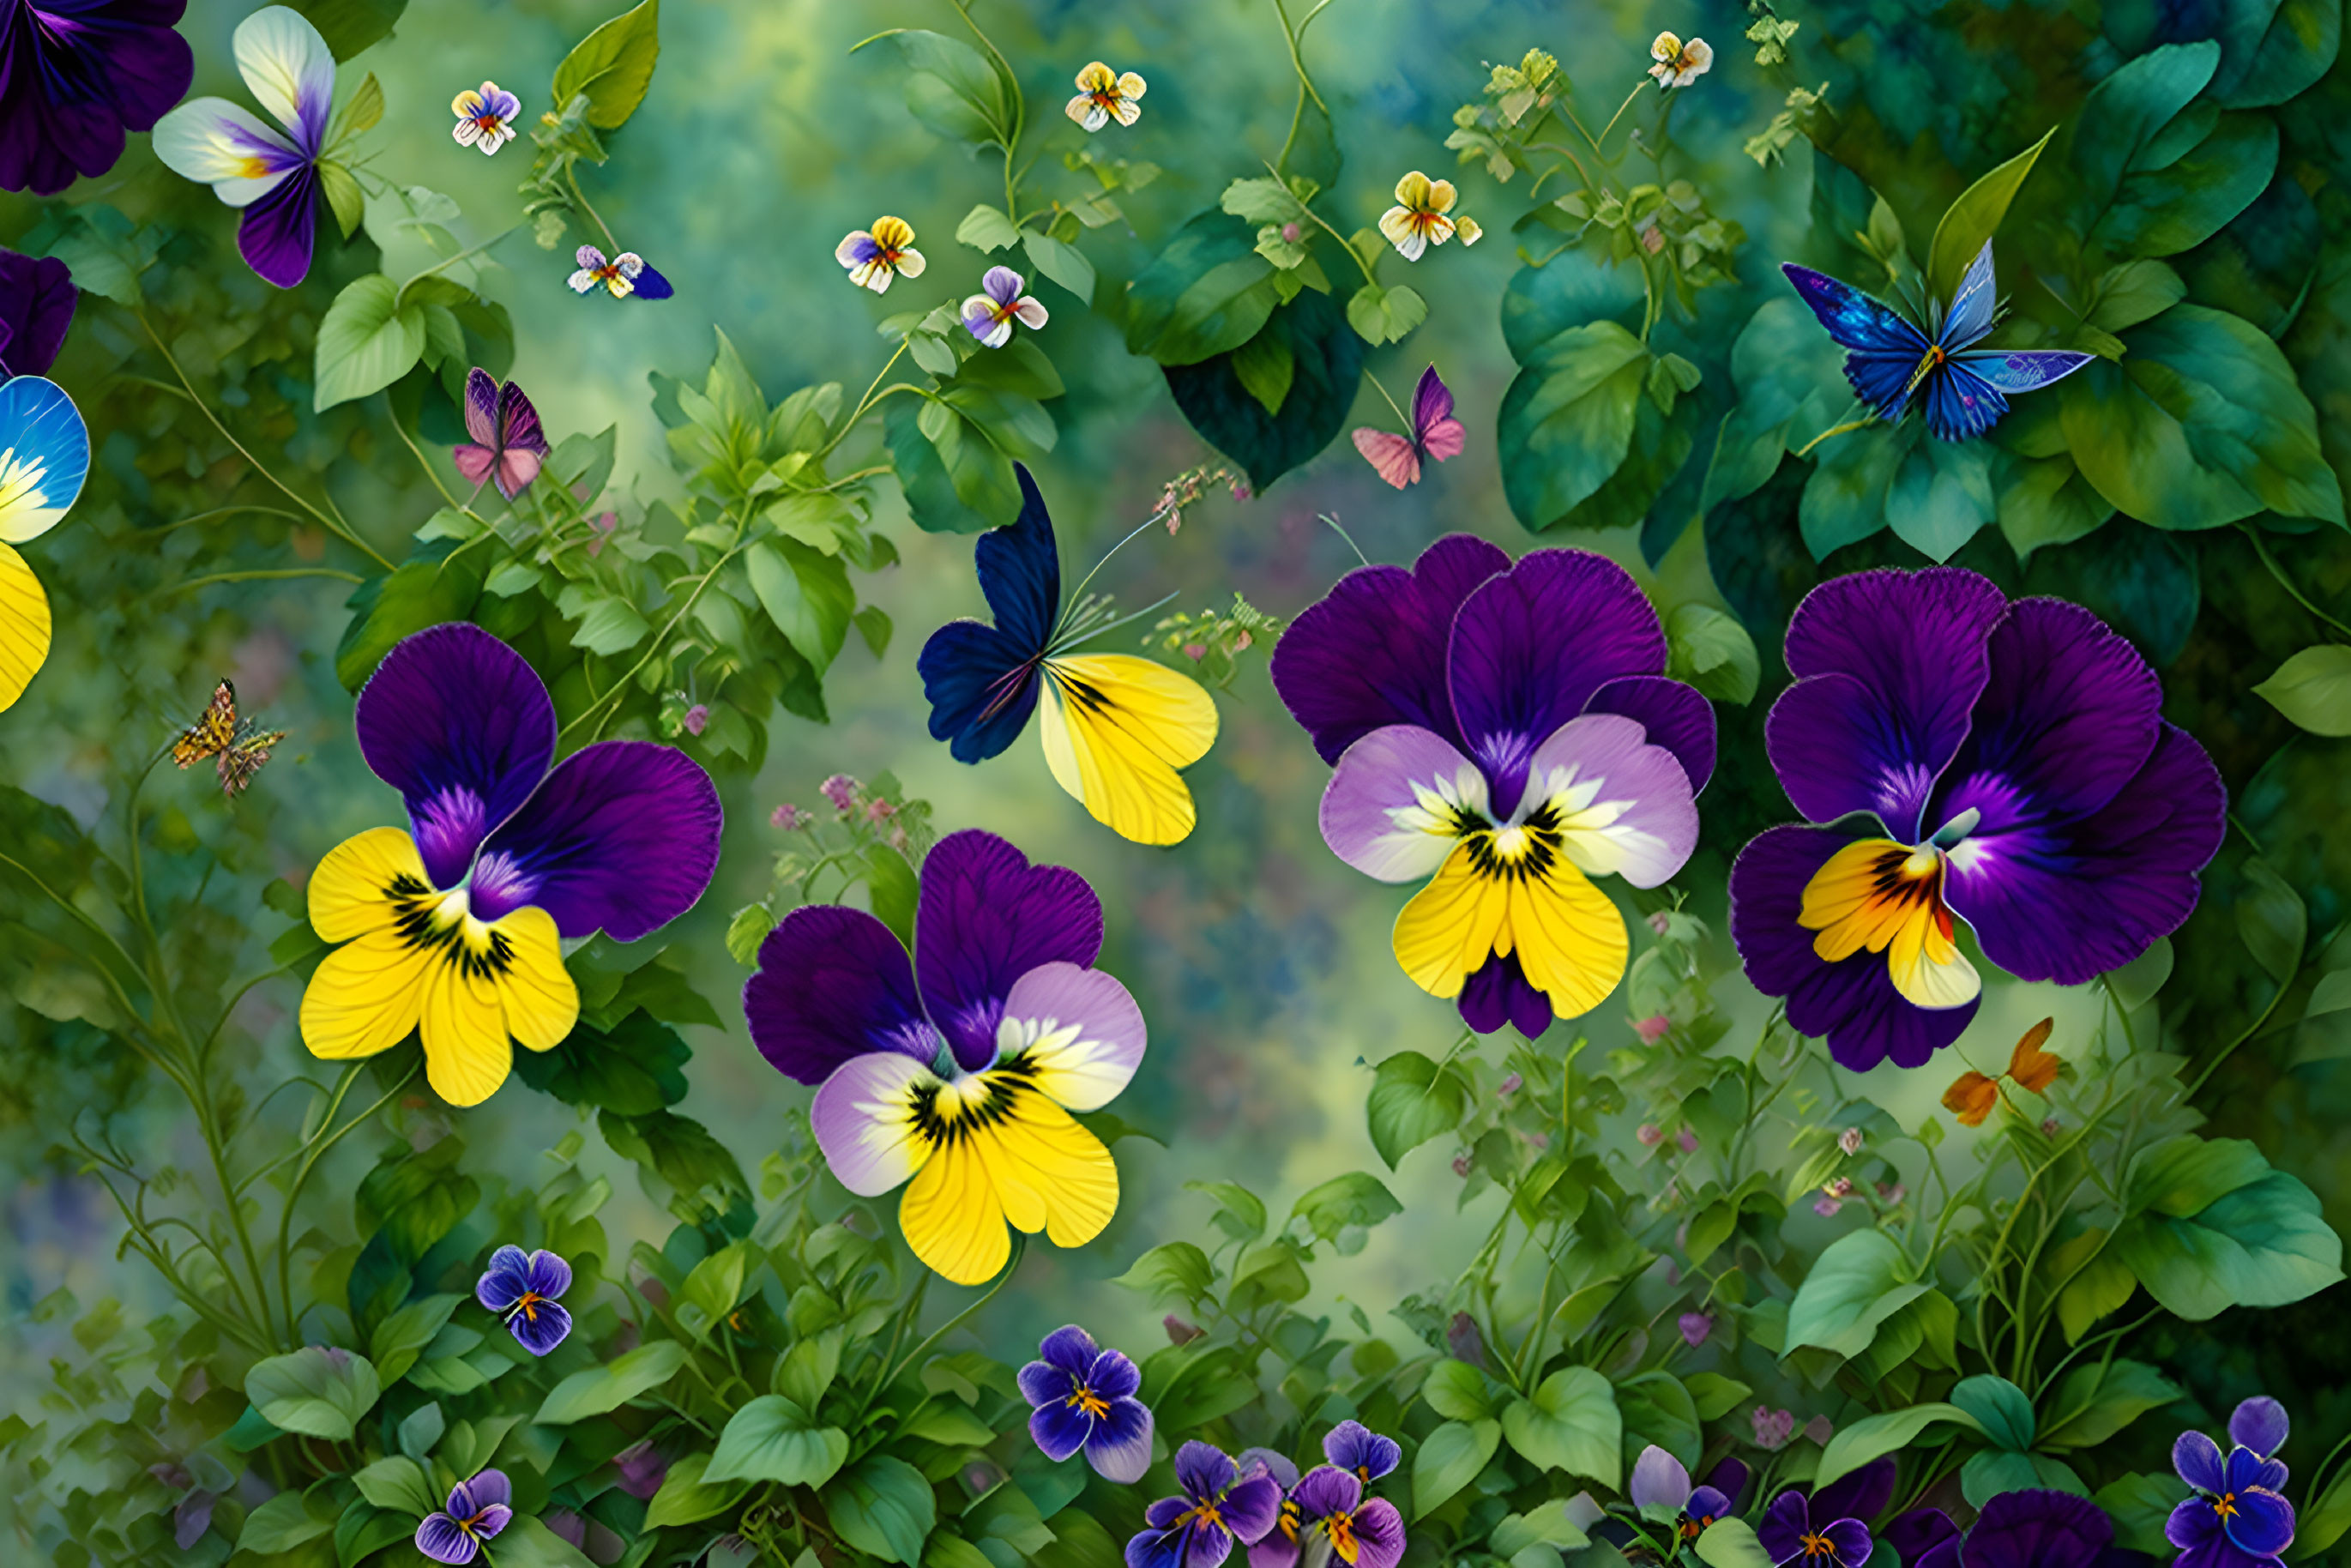 Colorful pansies and butterflies in lush garden setting